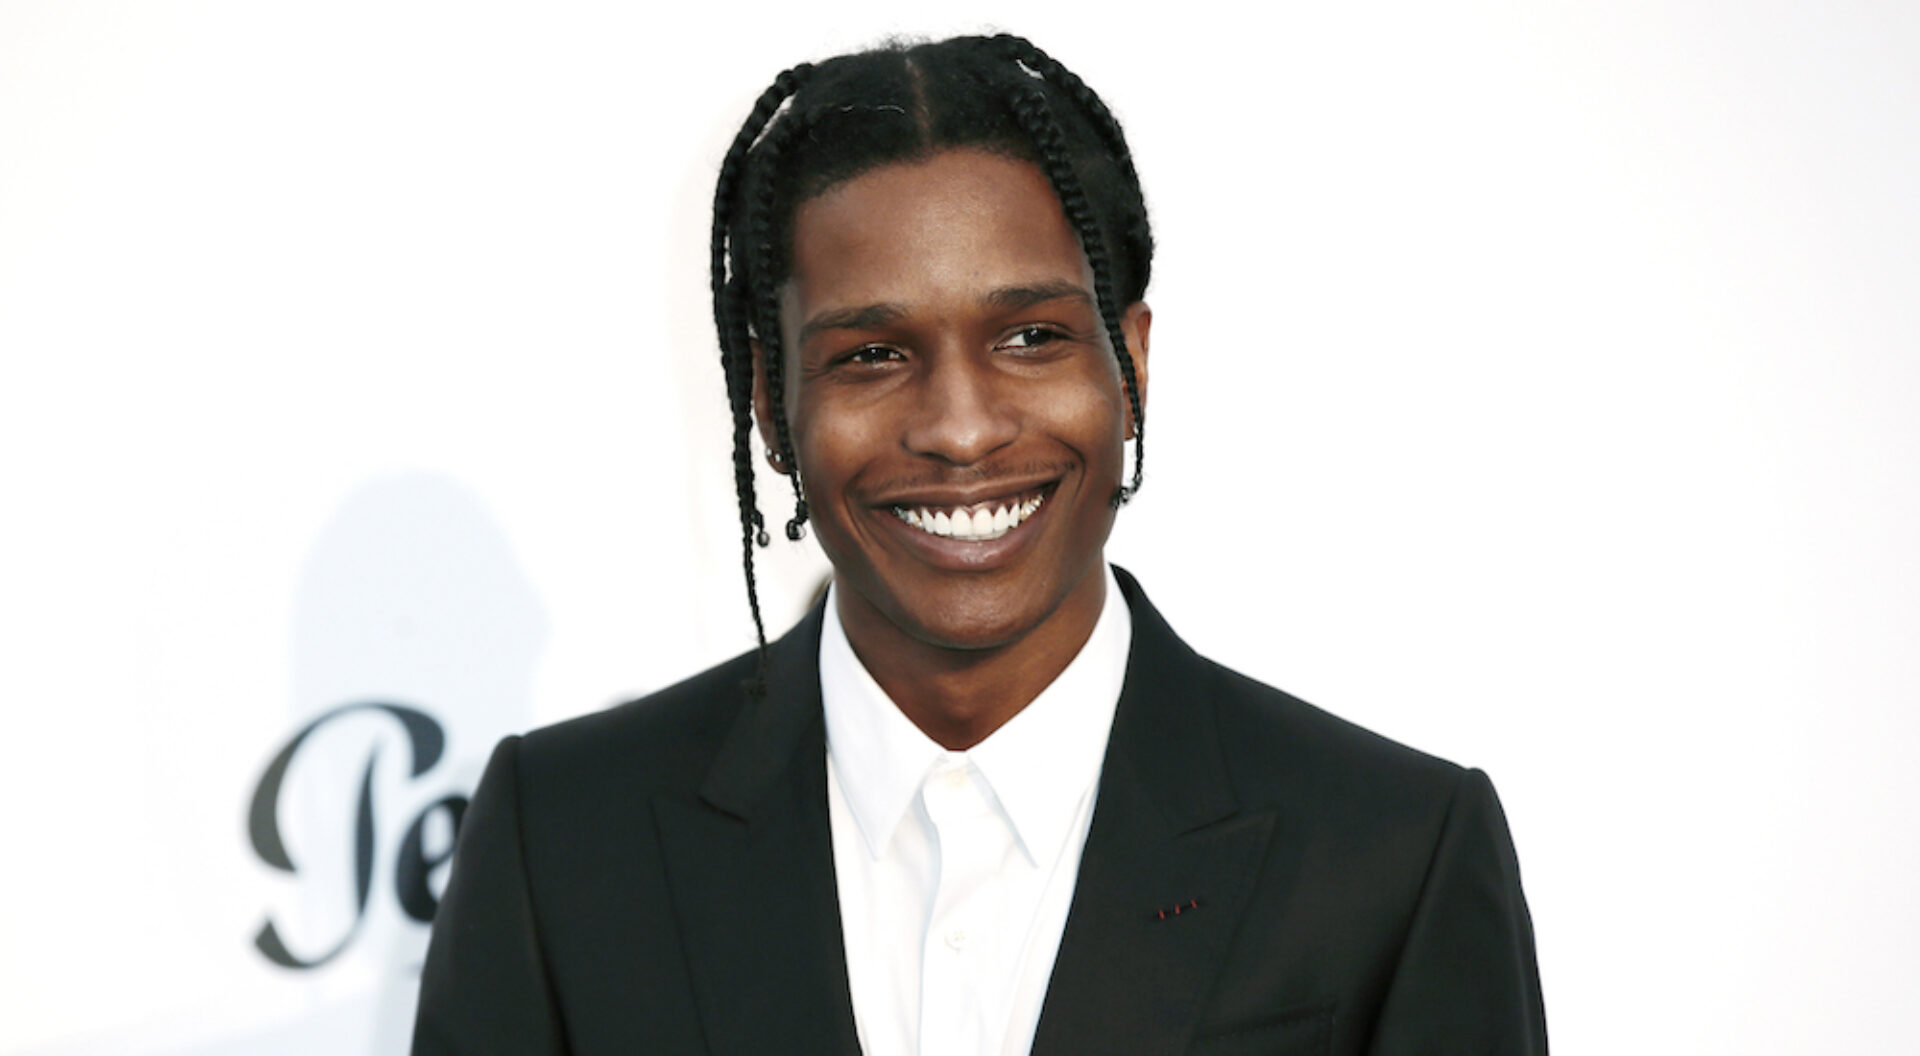 A judge determined there was enough evidence to send A$AP Rocky to court for assault with a firearm after allegedly shooting at a childhood friend.